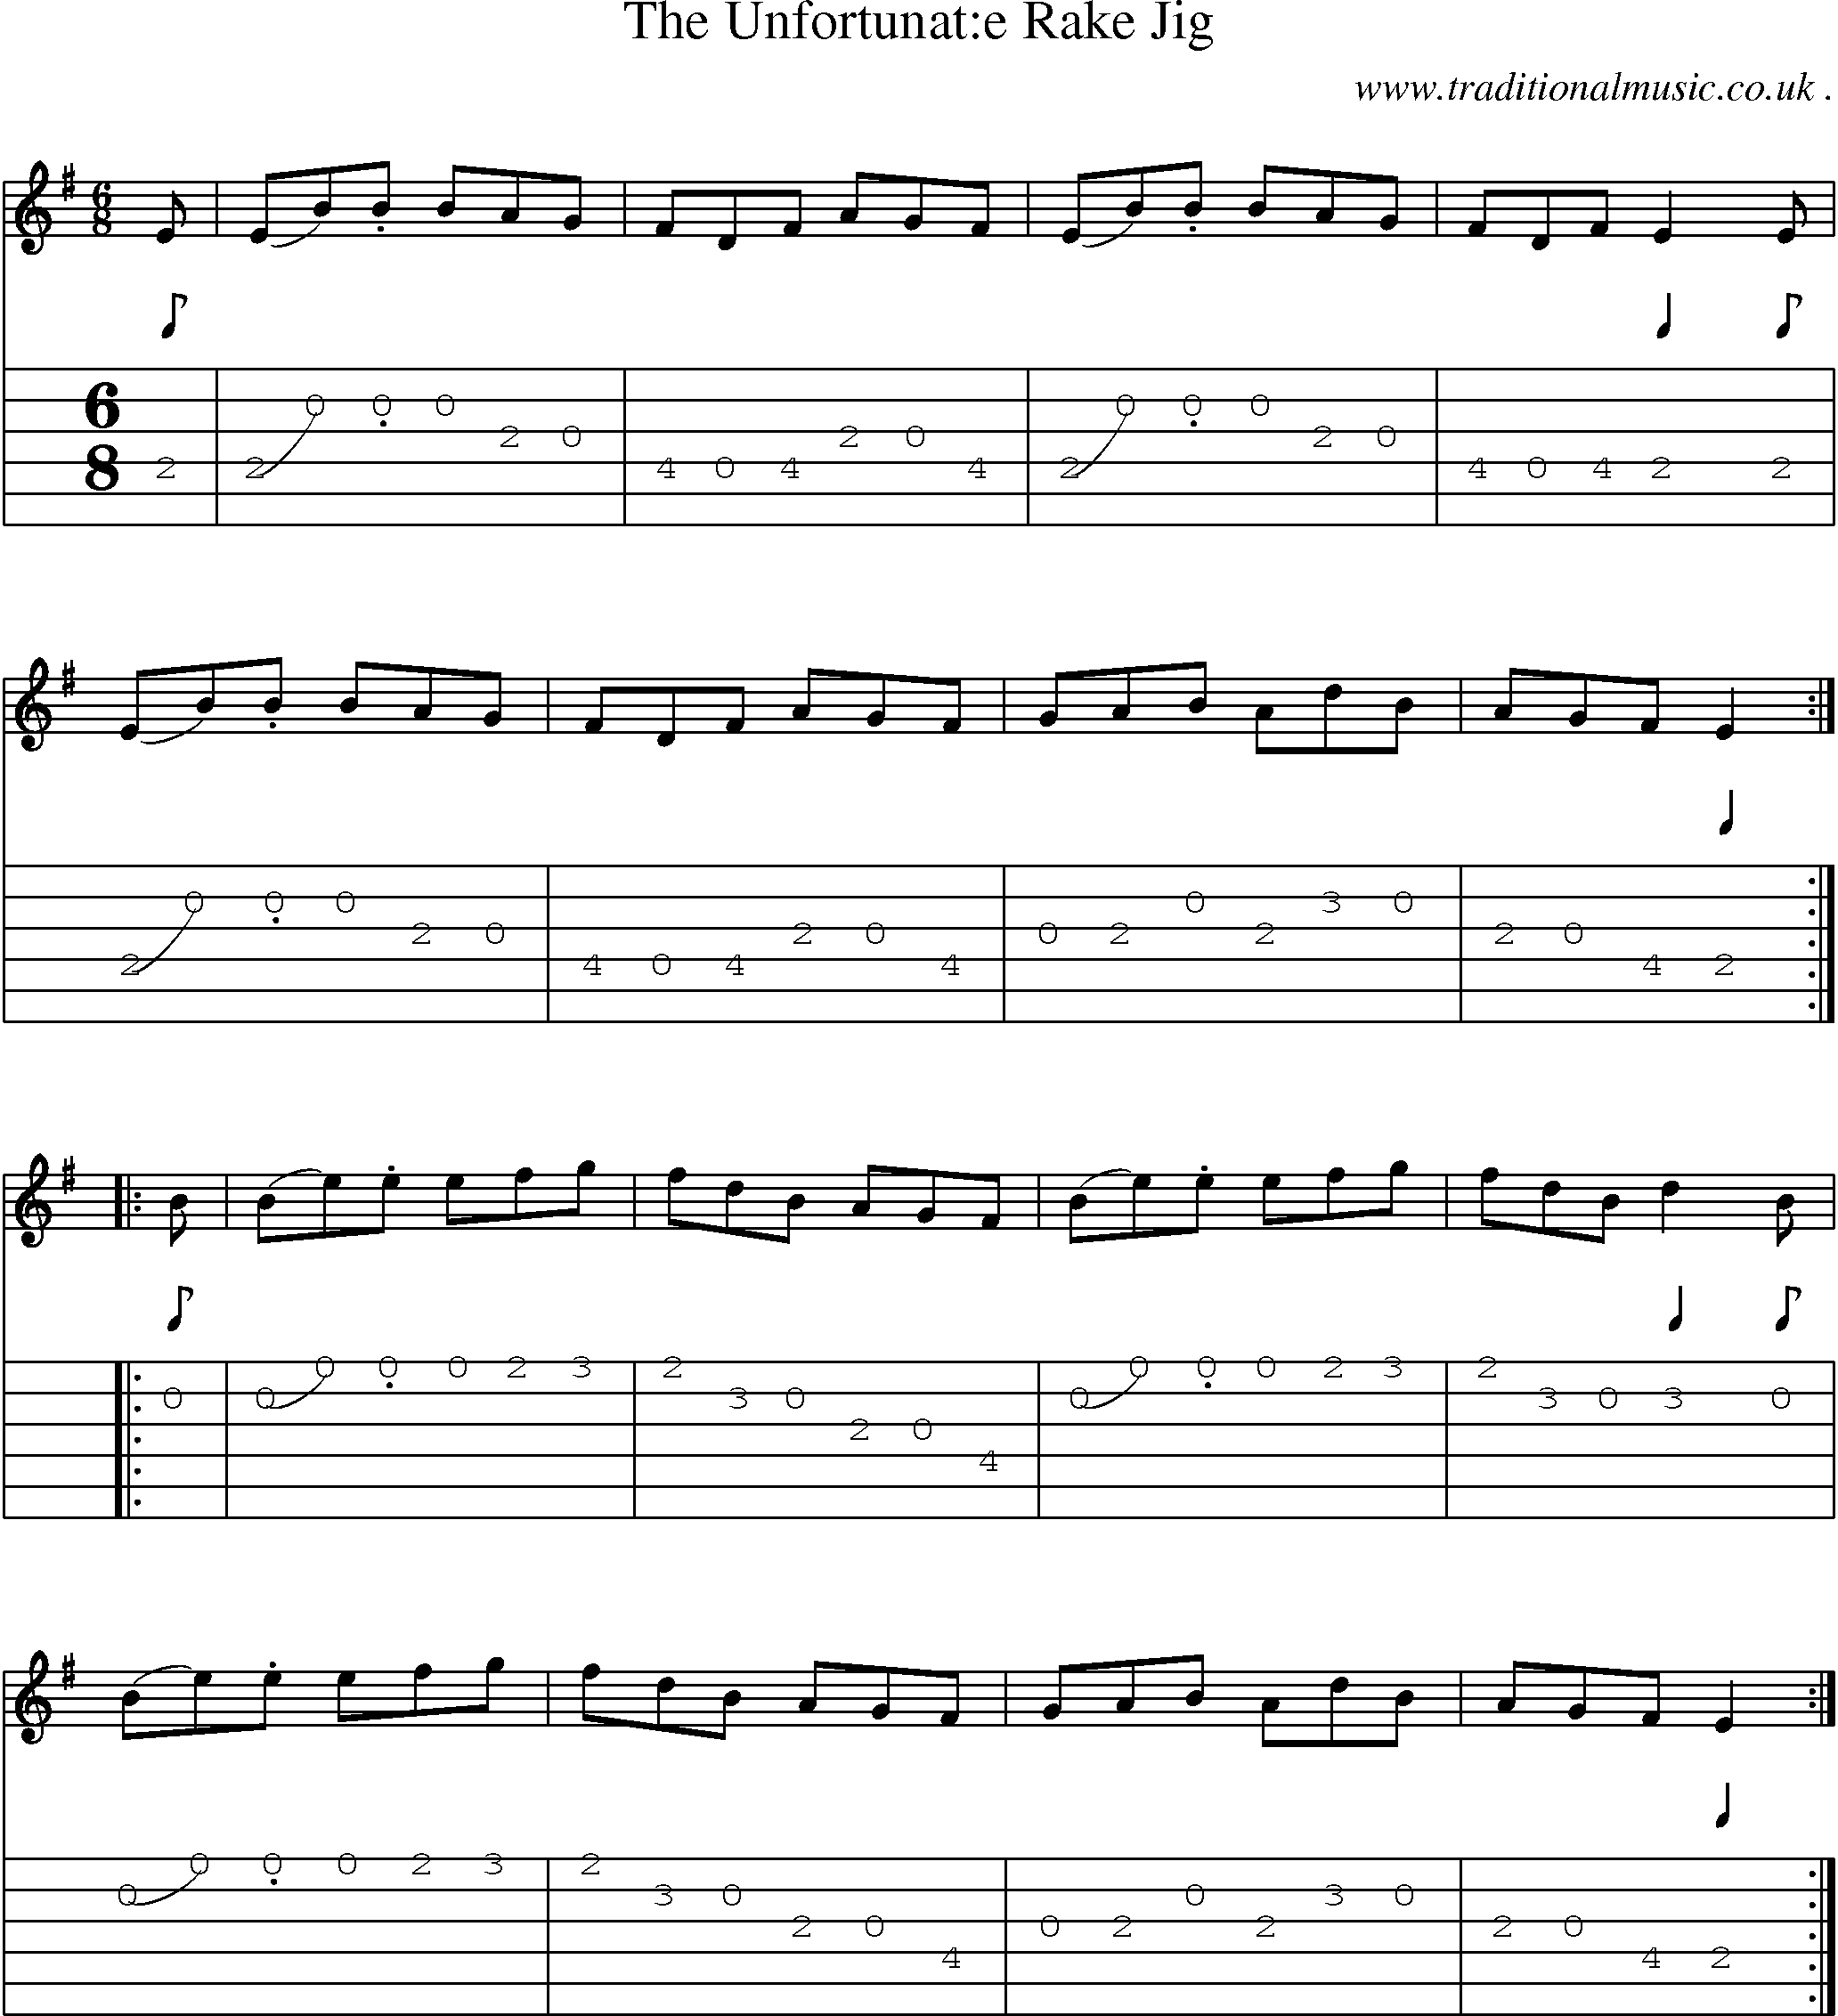 Sheet-Music and Guitar Tabs for The Unfortunate Rake Jig